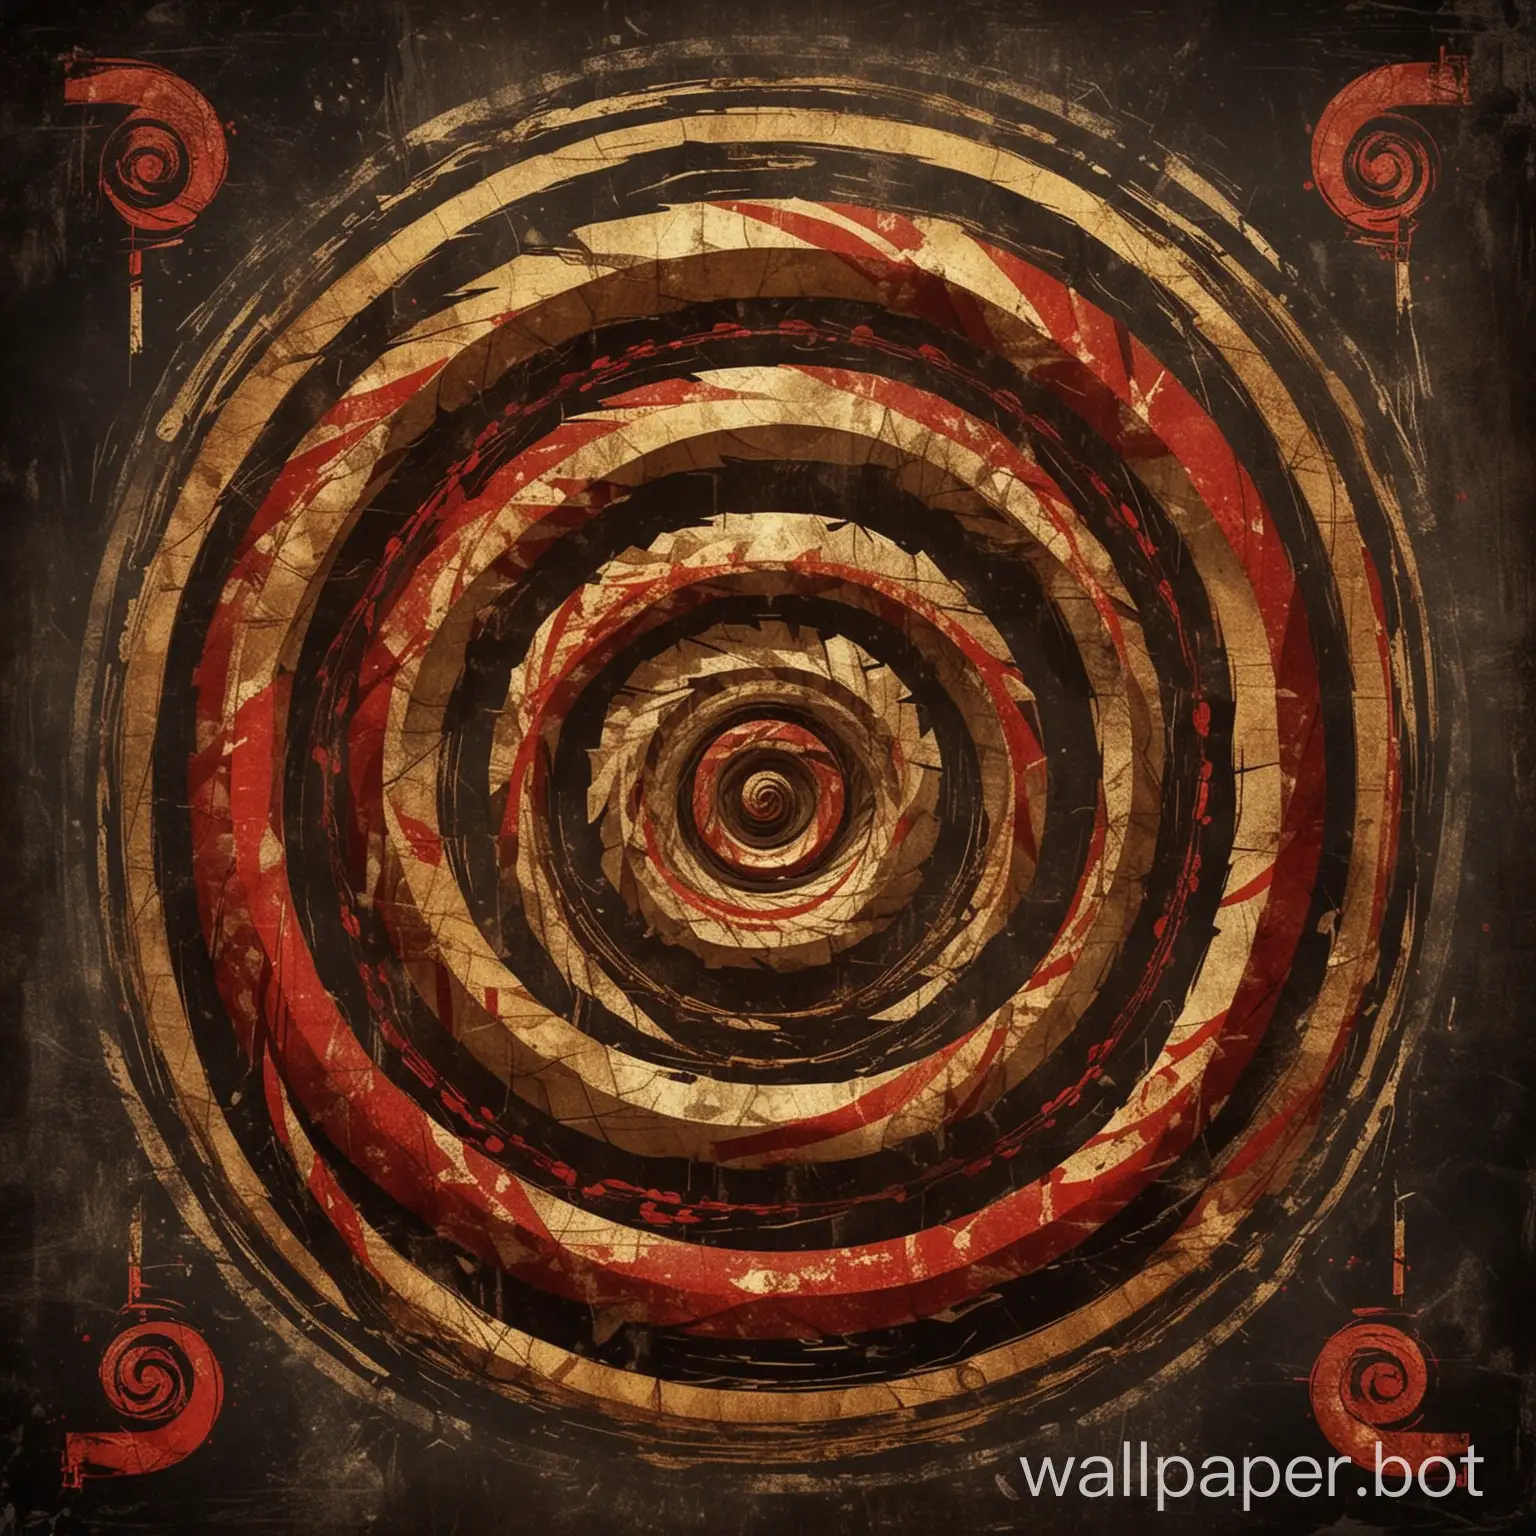 Vintage-Poster-with-Spiraling-Energy-in-Dark-Tones-with-Red-and-Gold-Accents